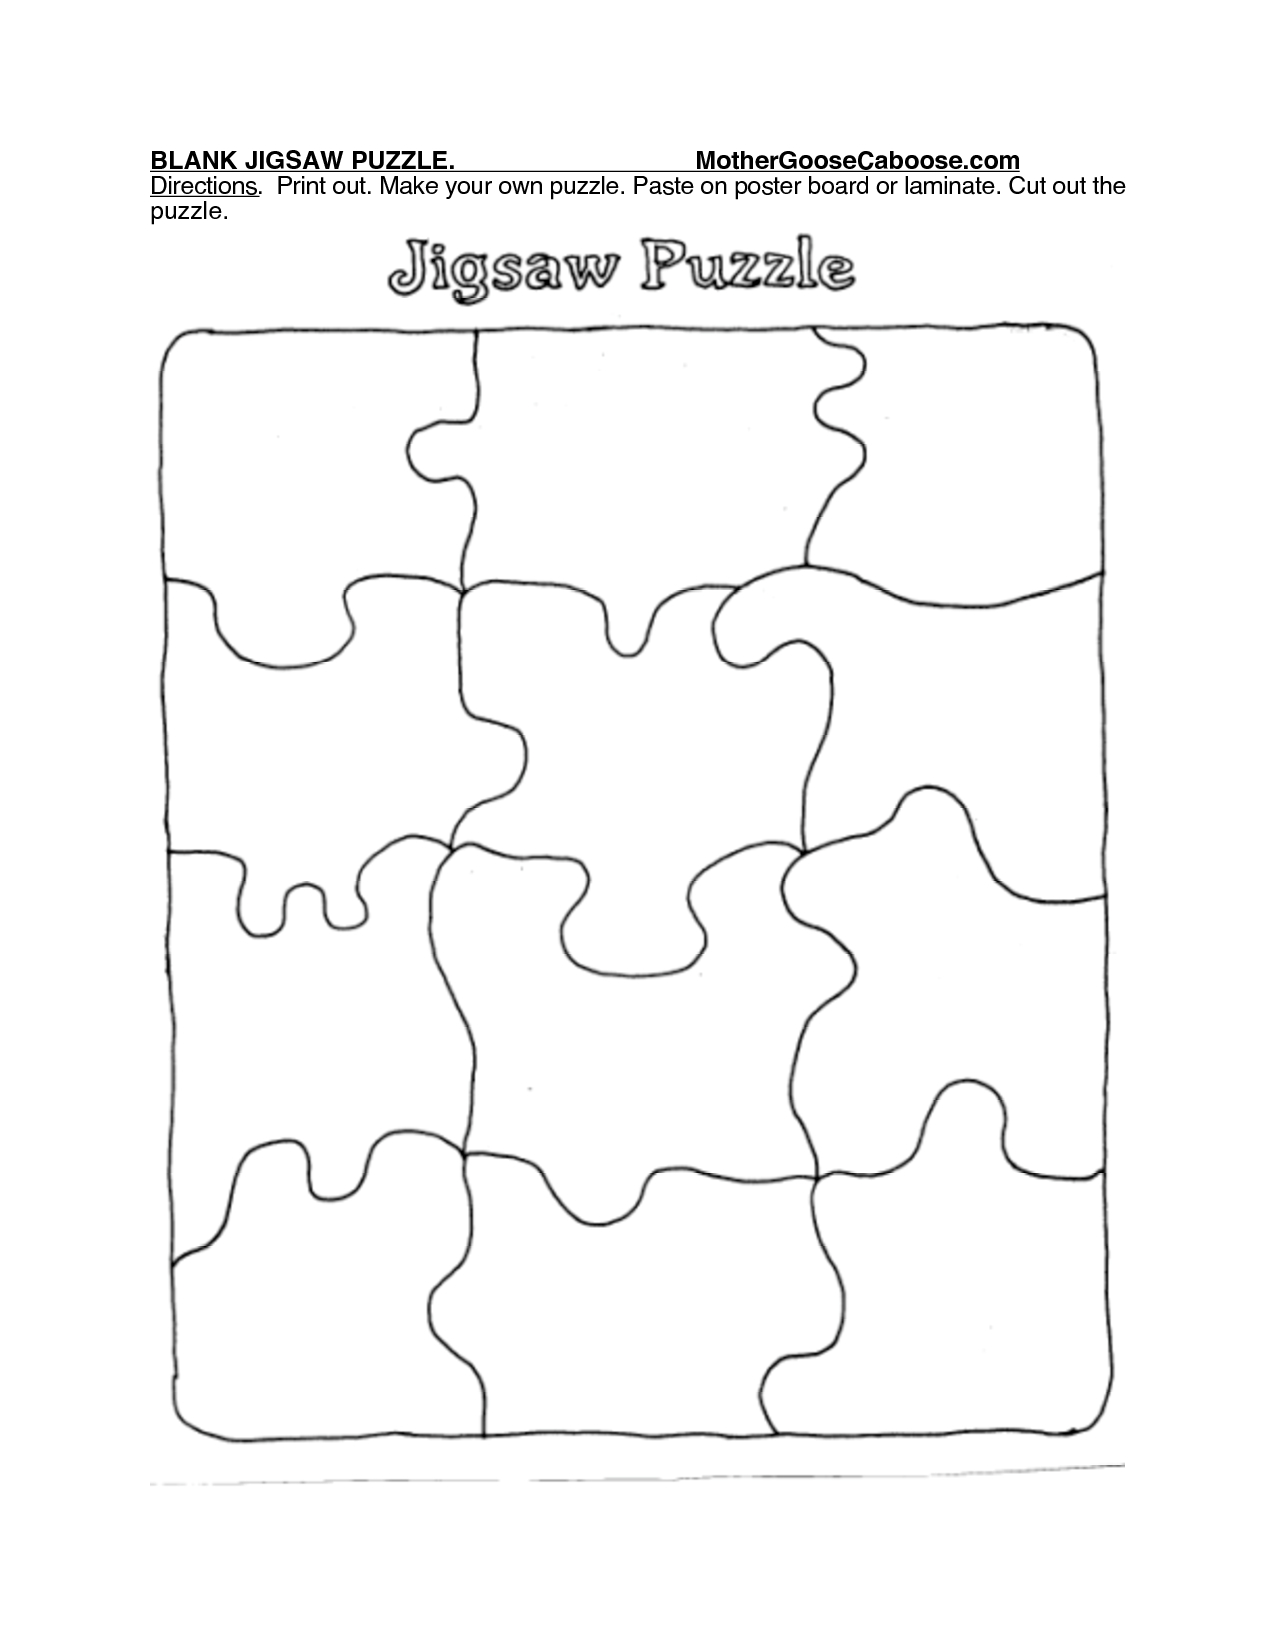 Printable Puzzle Piece Template | Search Results | New Calendar - Printable Puzzle Jigsaw